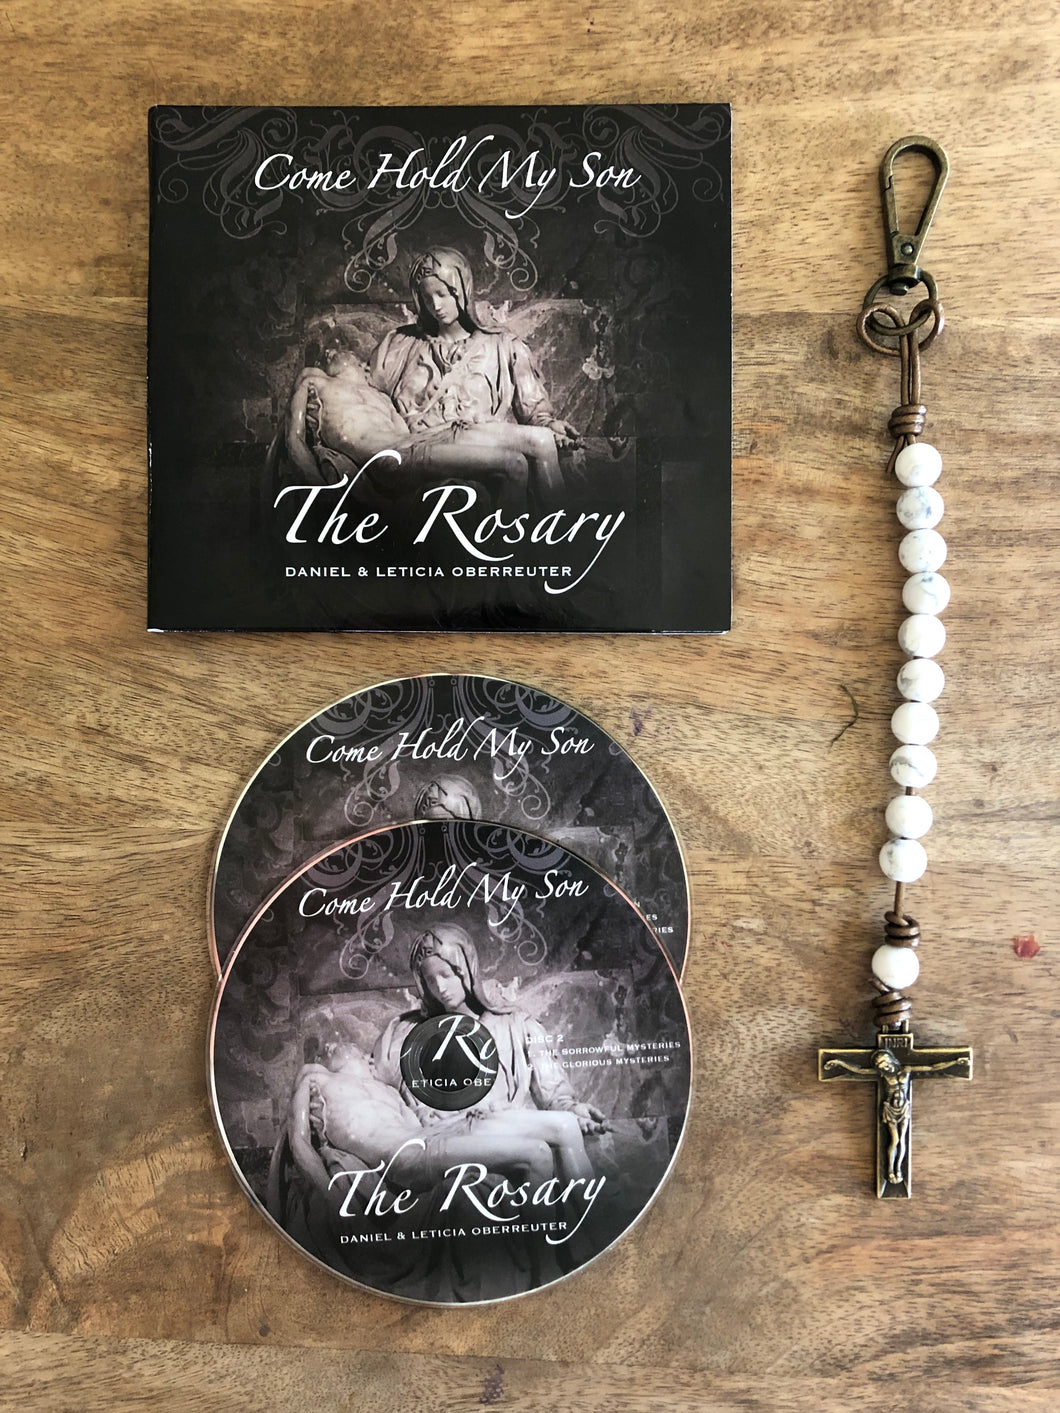 White Decade + Come Hold My Son - The Rosary